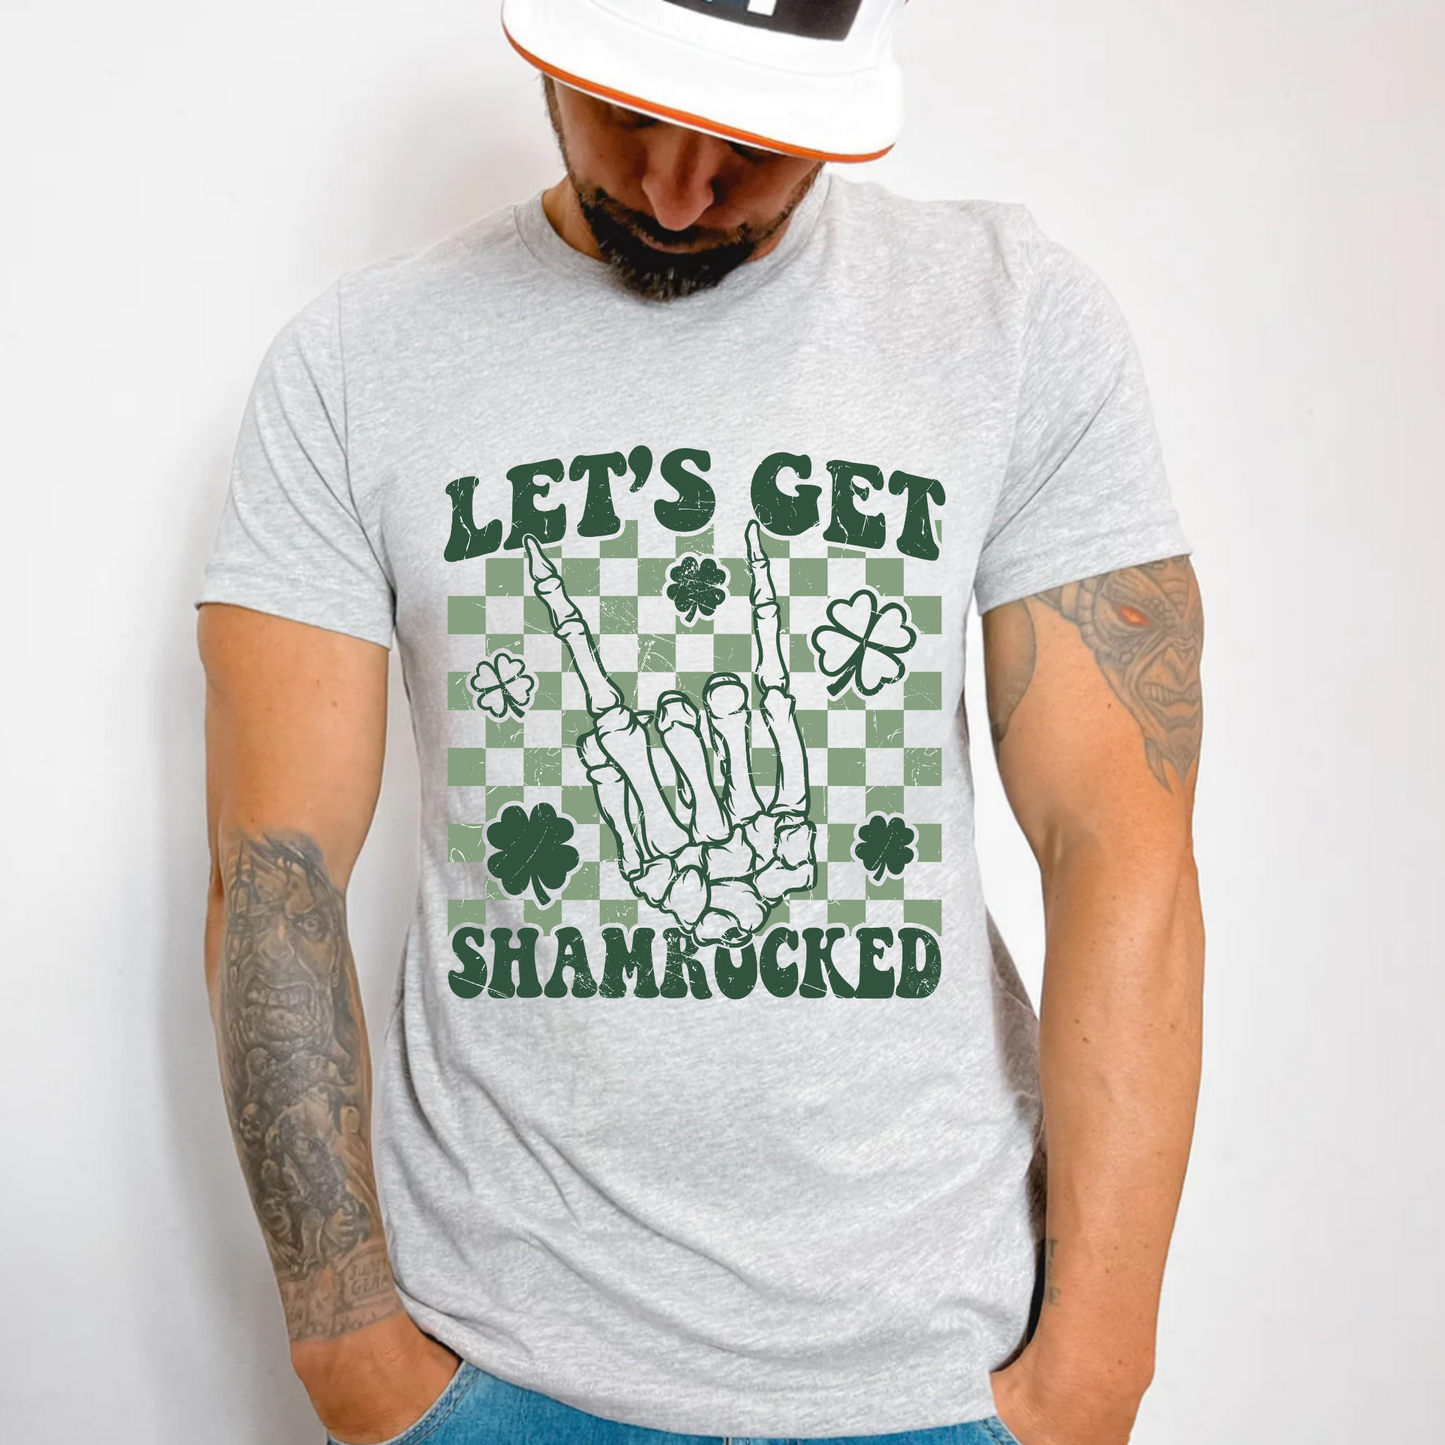 (Shirt not included) Lets Get Shamrocked  -  Clear Film Transfer